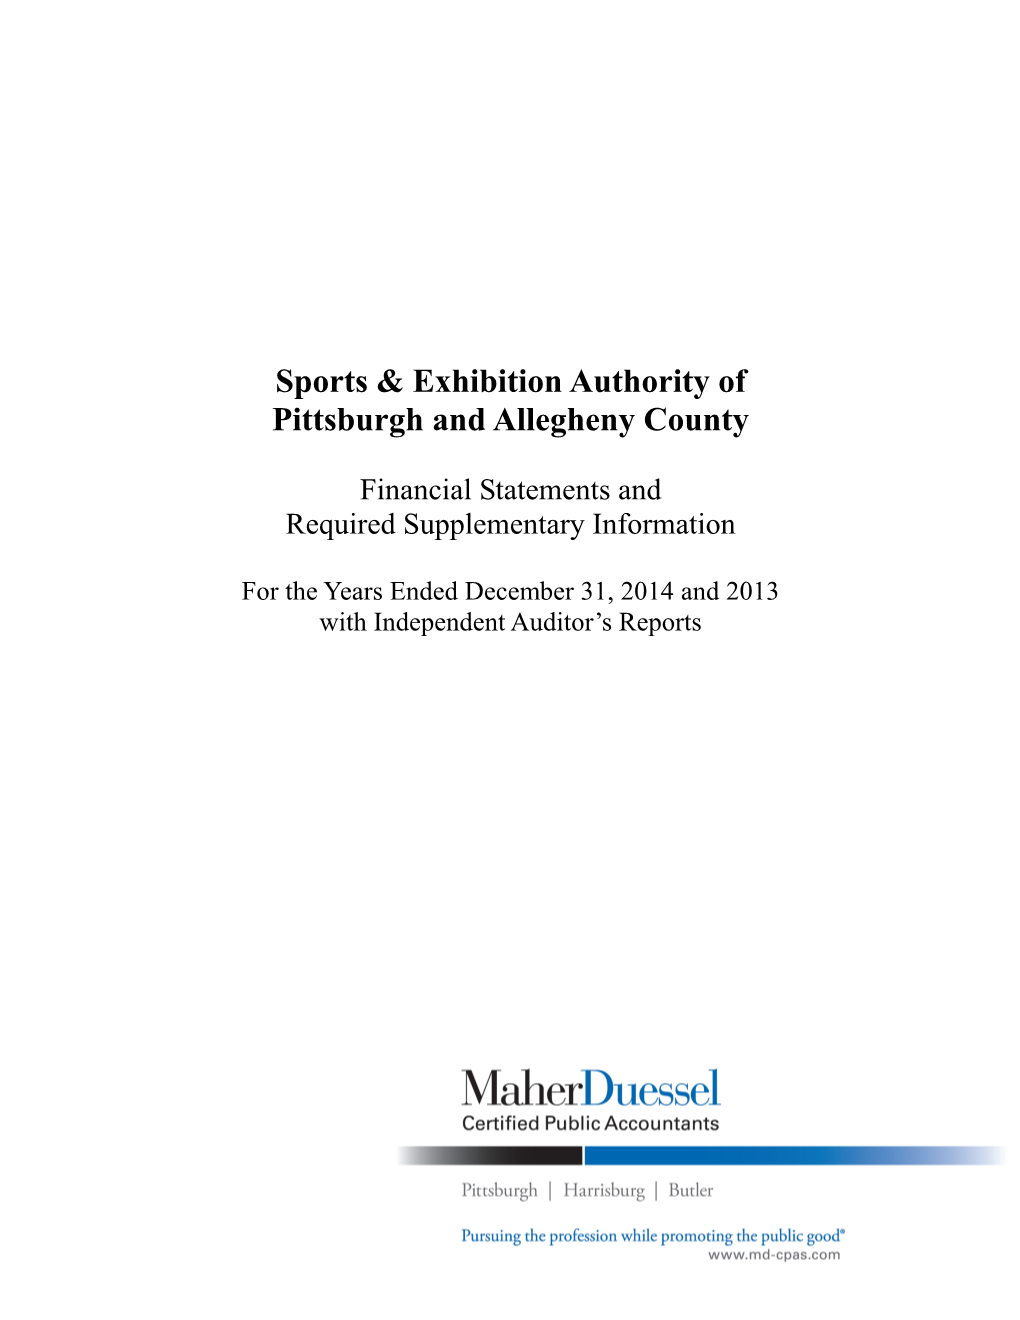 2014 Audited Financial Statements